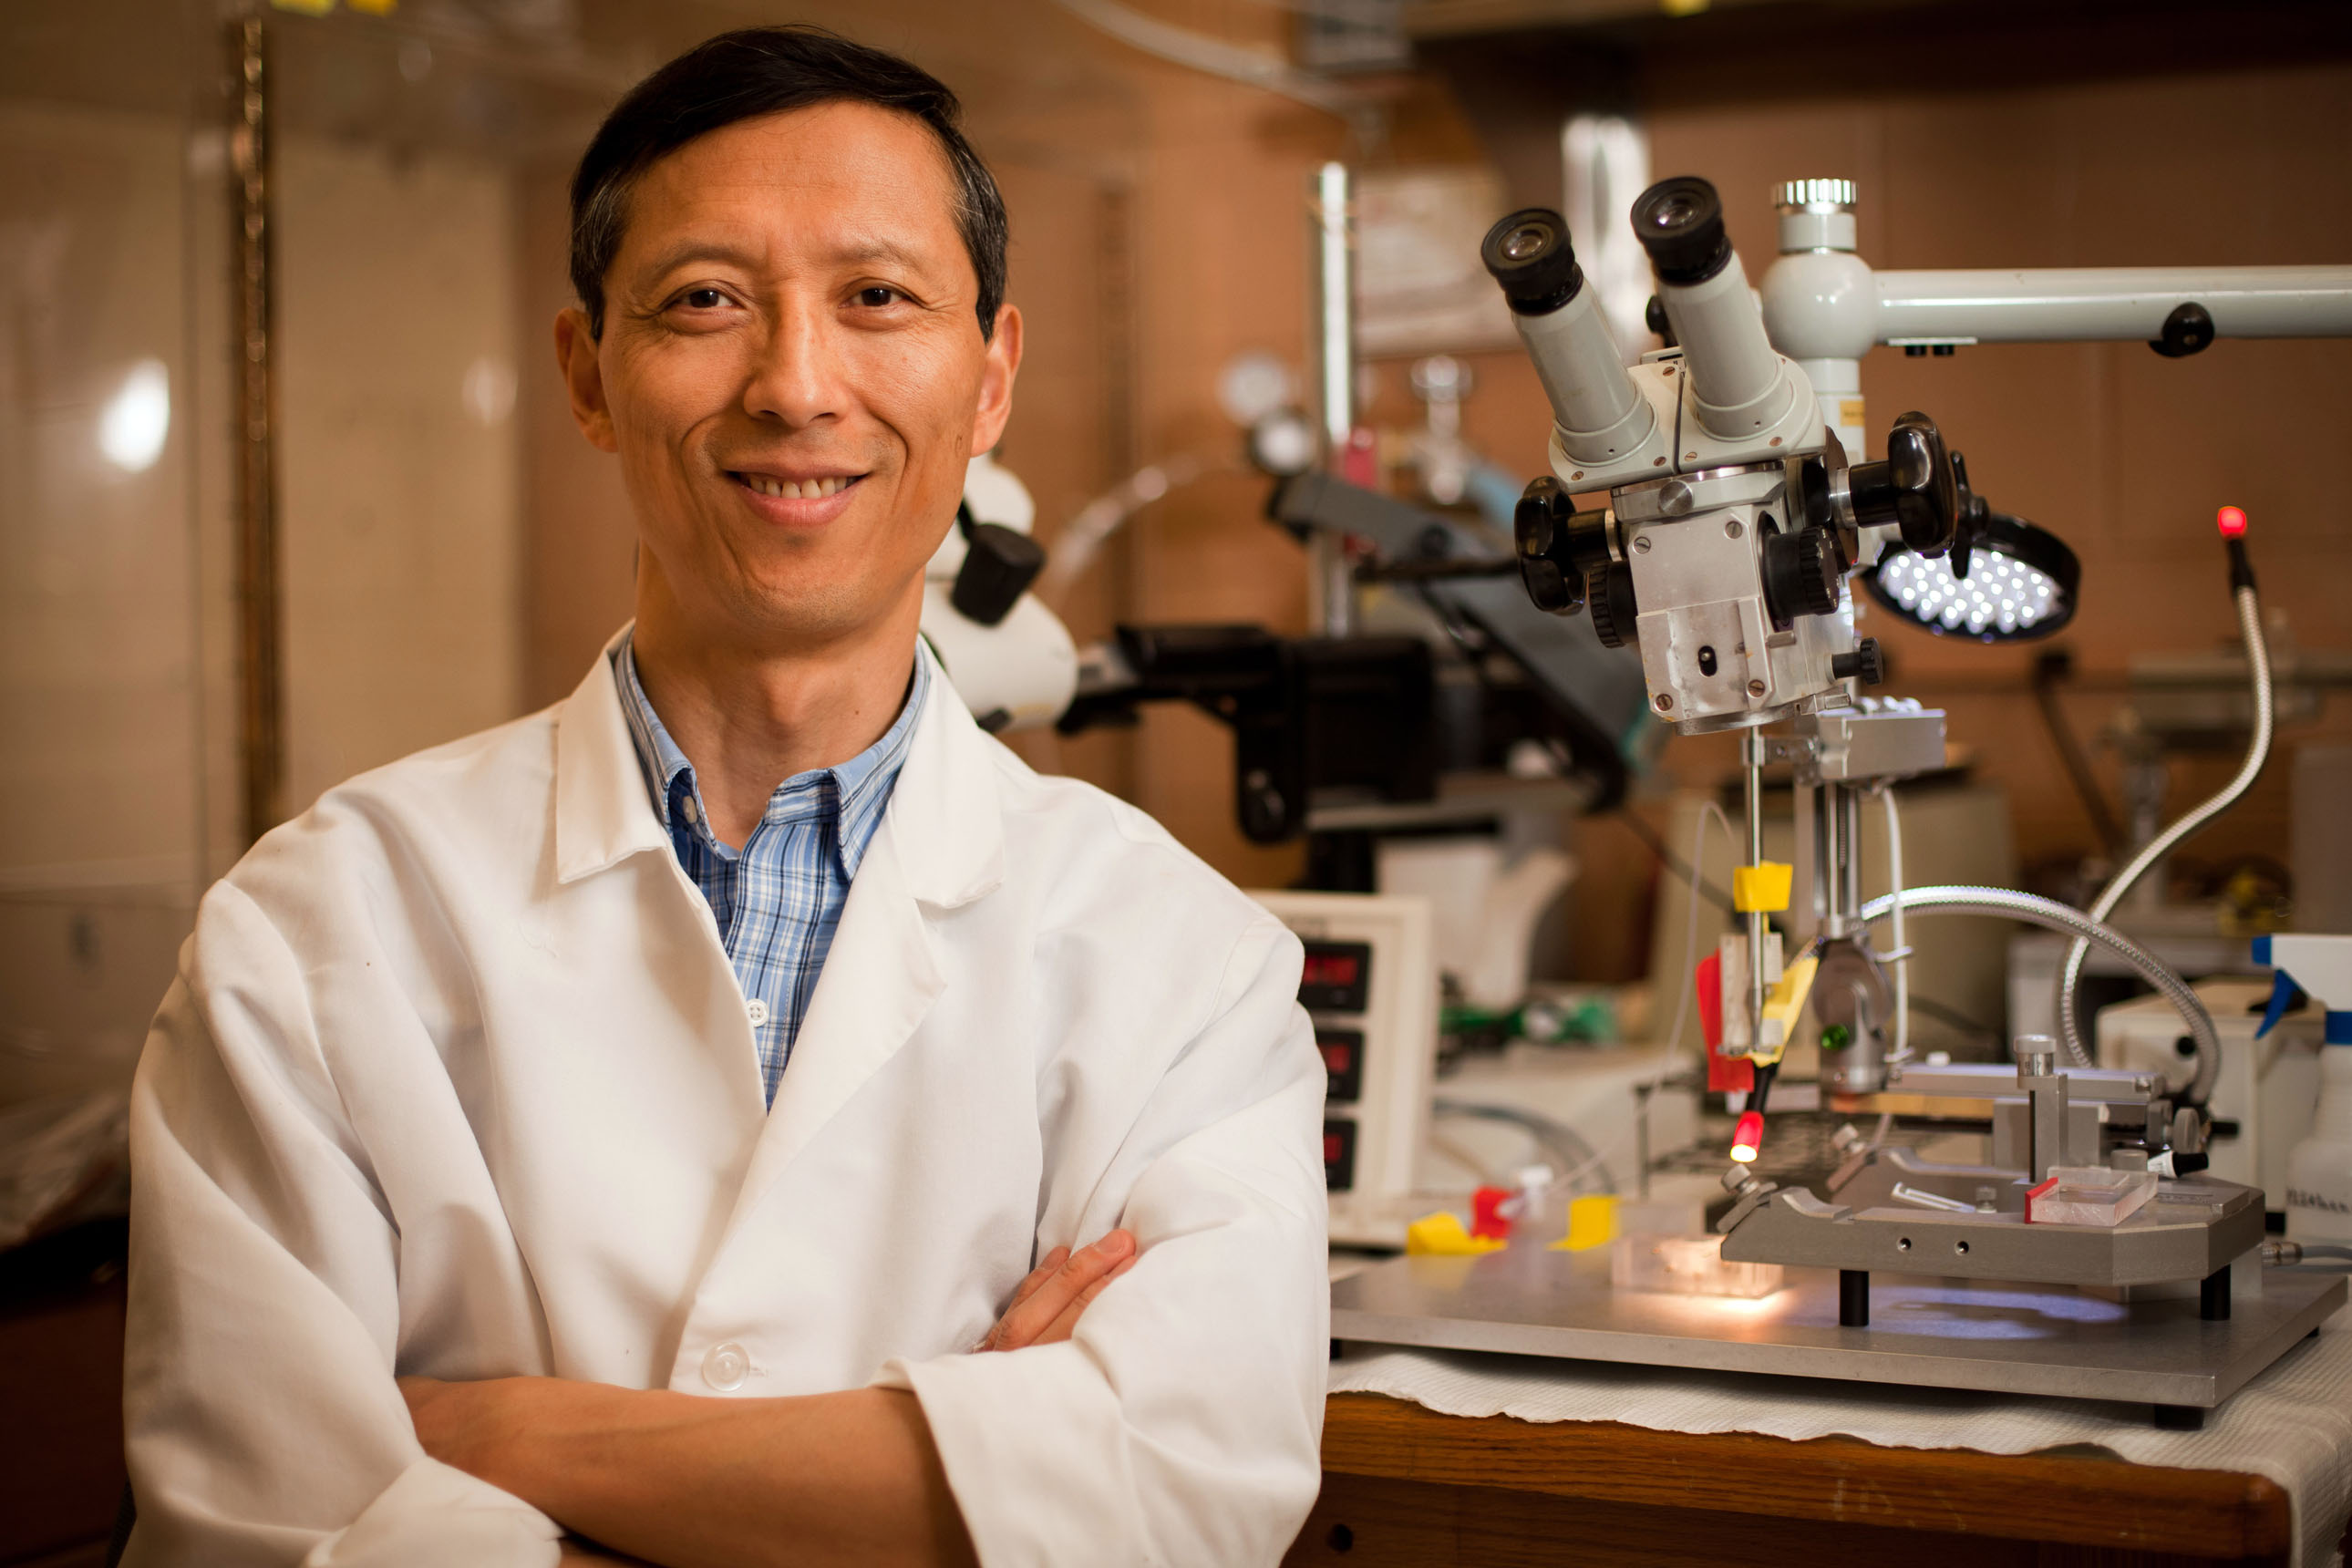 Riyi Shi, Purdue professor of neuroscience and biomedical engineering in the Department of Basic Medical Sciences, College of Veterinary Medicine and Weldon School of Biomedical Engineering